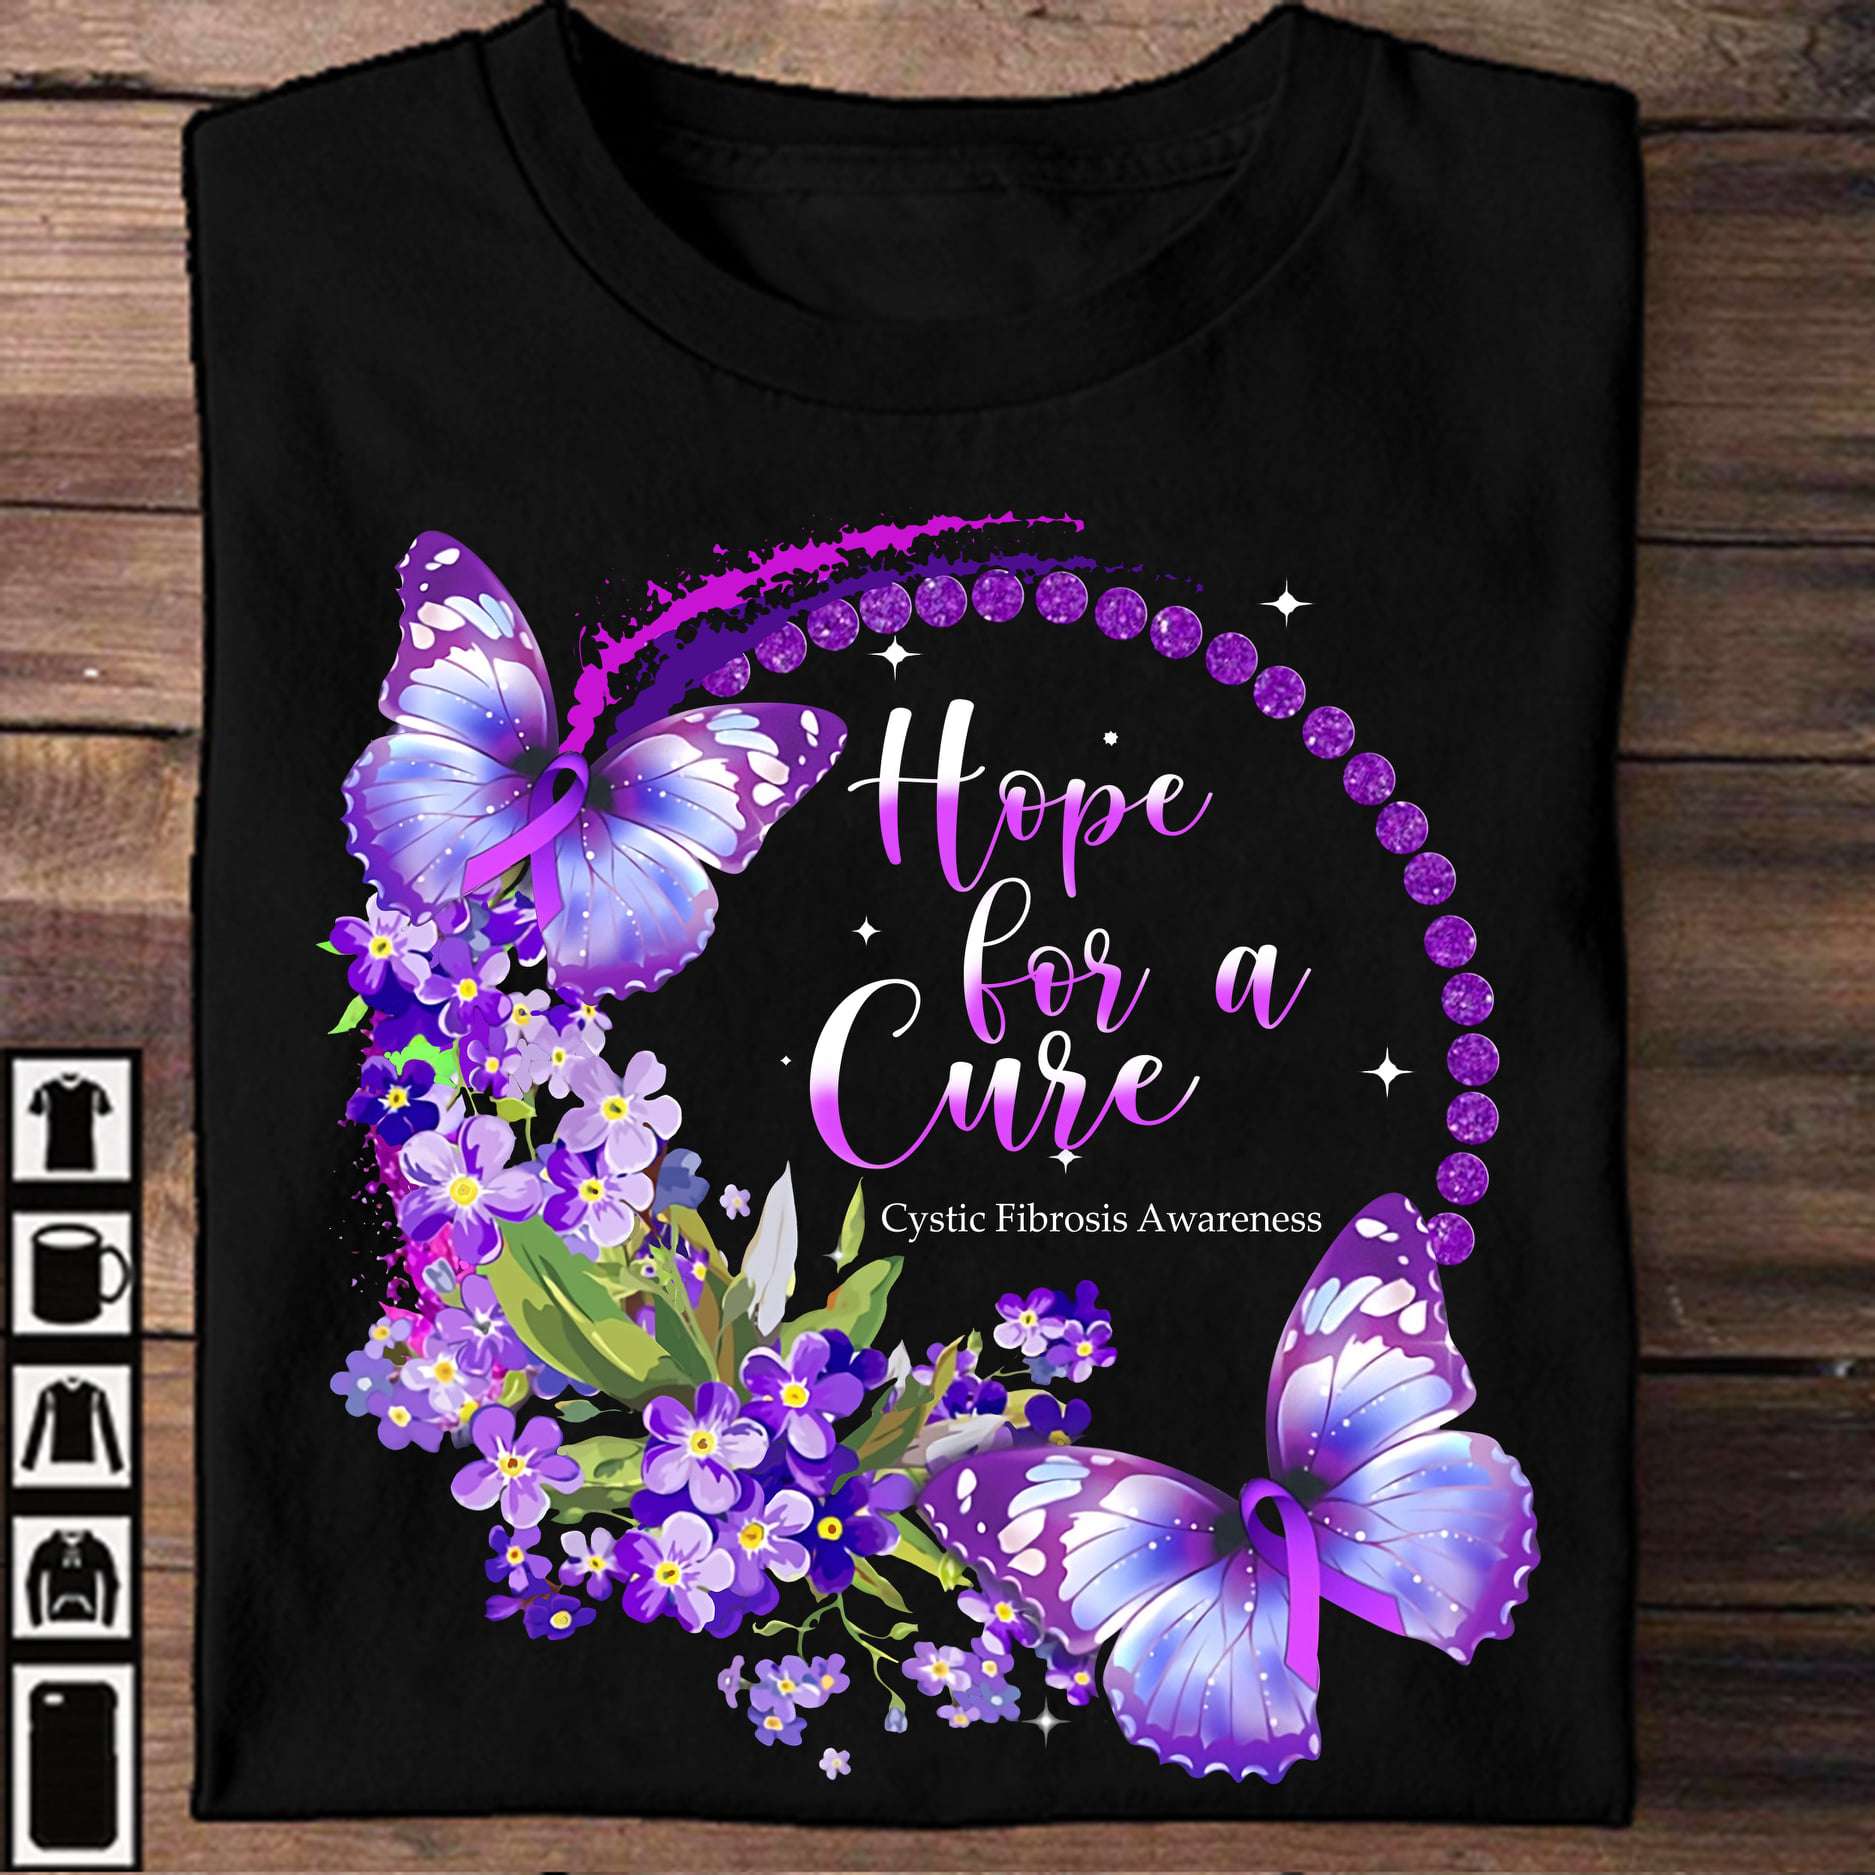 Hope for a cure - Cystic Fibrosis awareness, butterfly Cytis Fibrosis